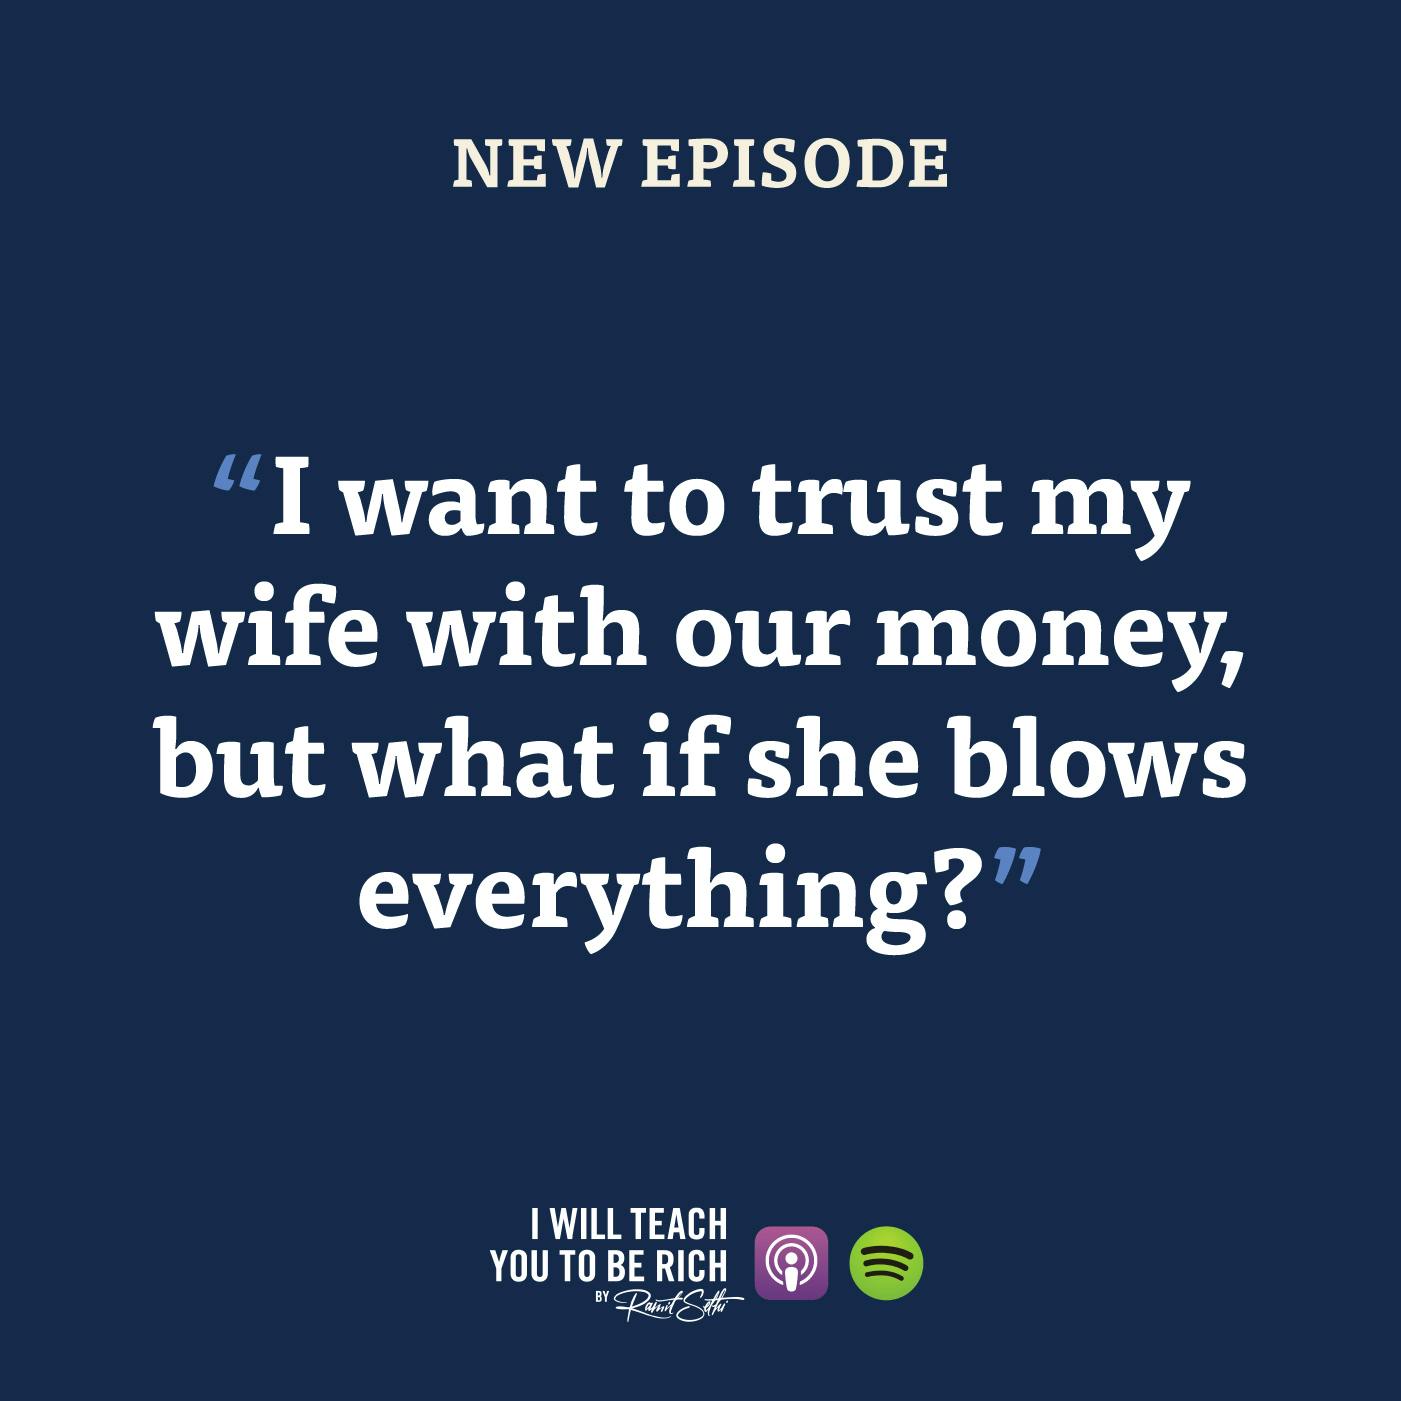 21. Part 2: “I want to trust my wife with our money, but what if she blows everything?”